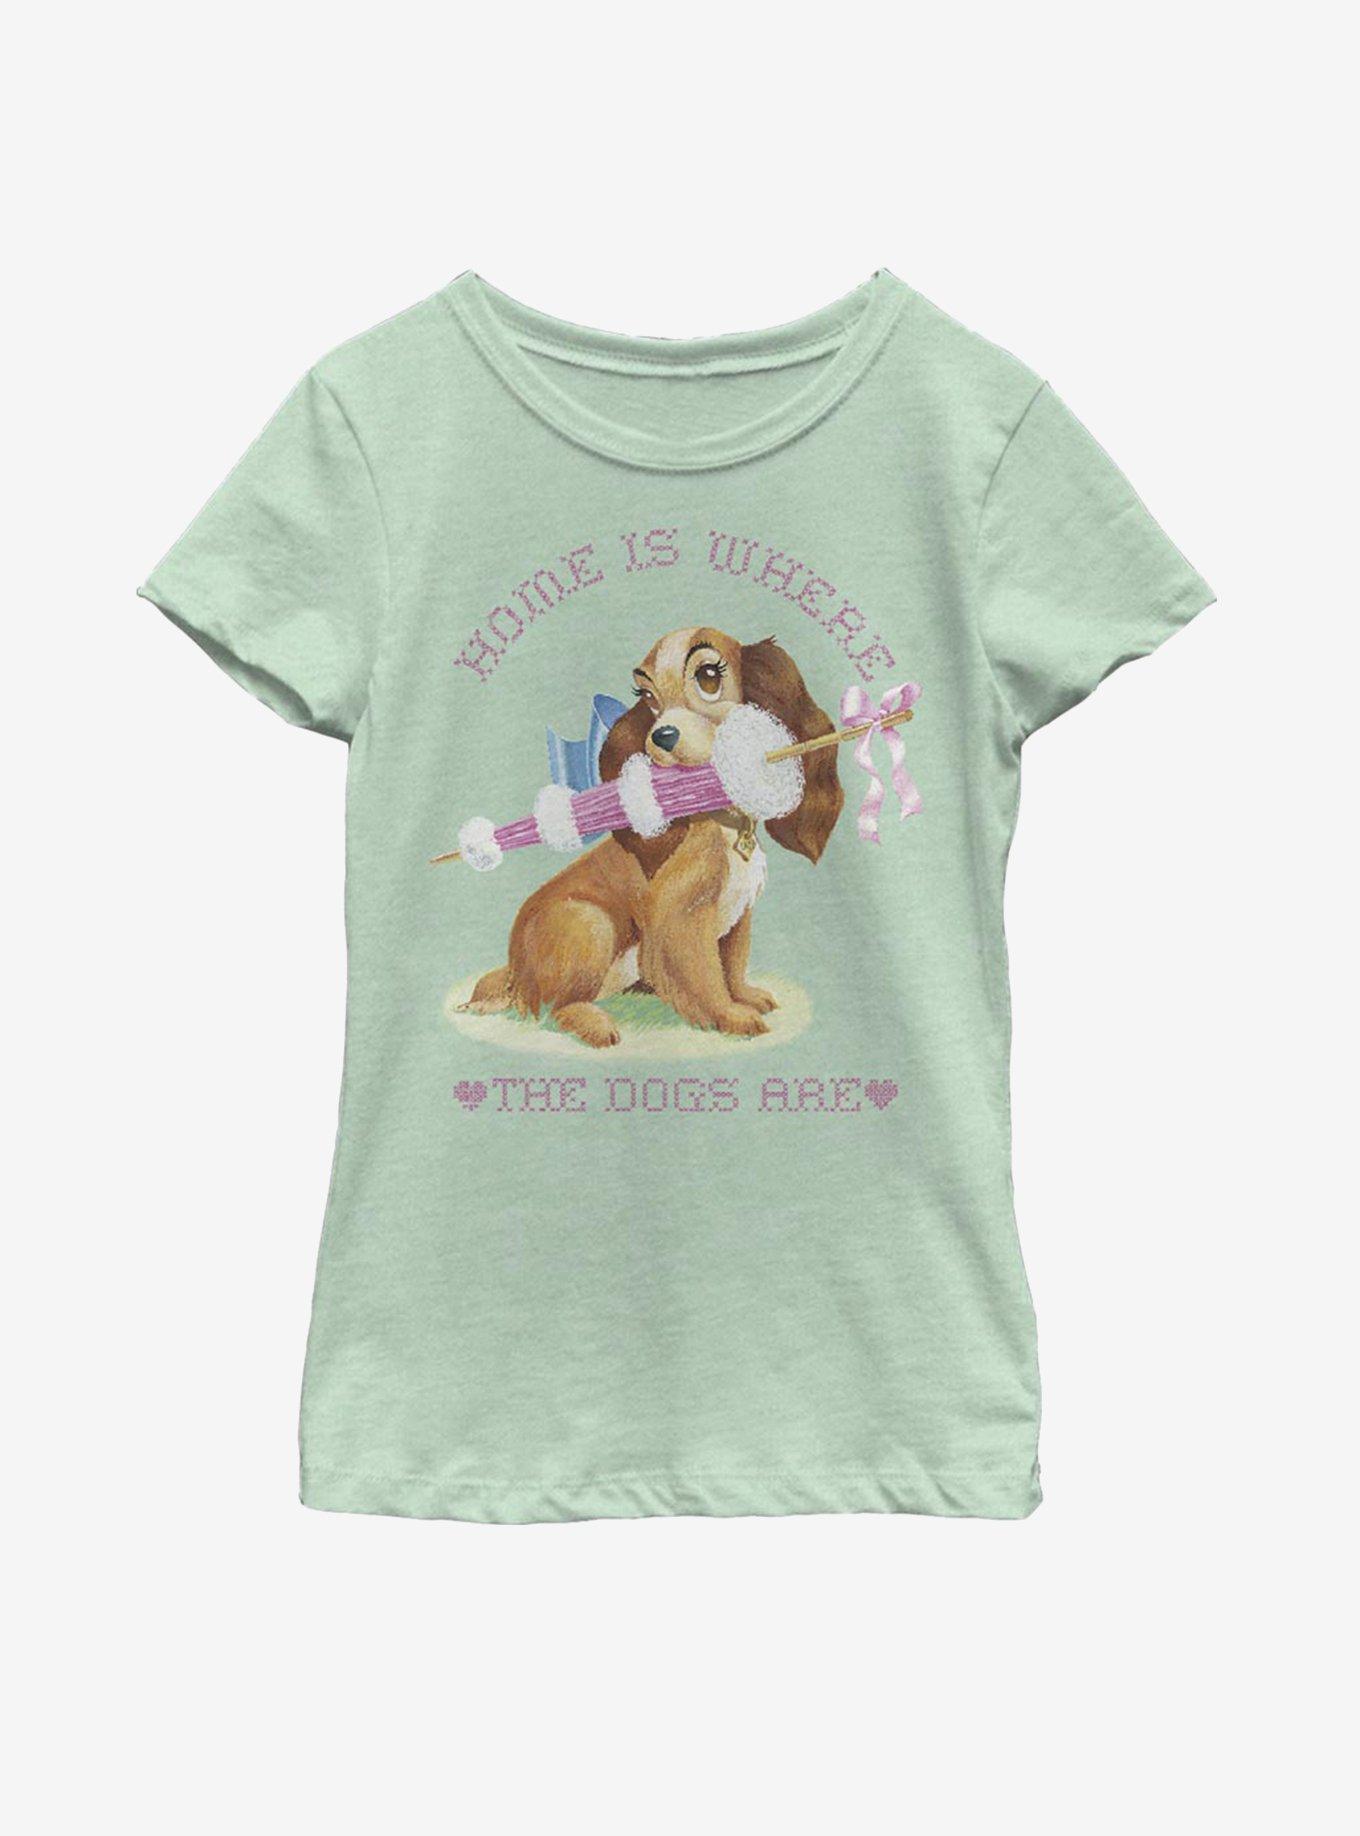 Disney Lady And The Tramp Lady Where The Dogs Are Youth Girls T-Shirt, MINT, hi-res